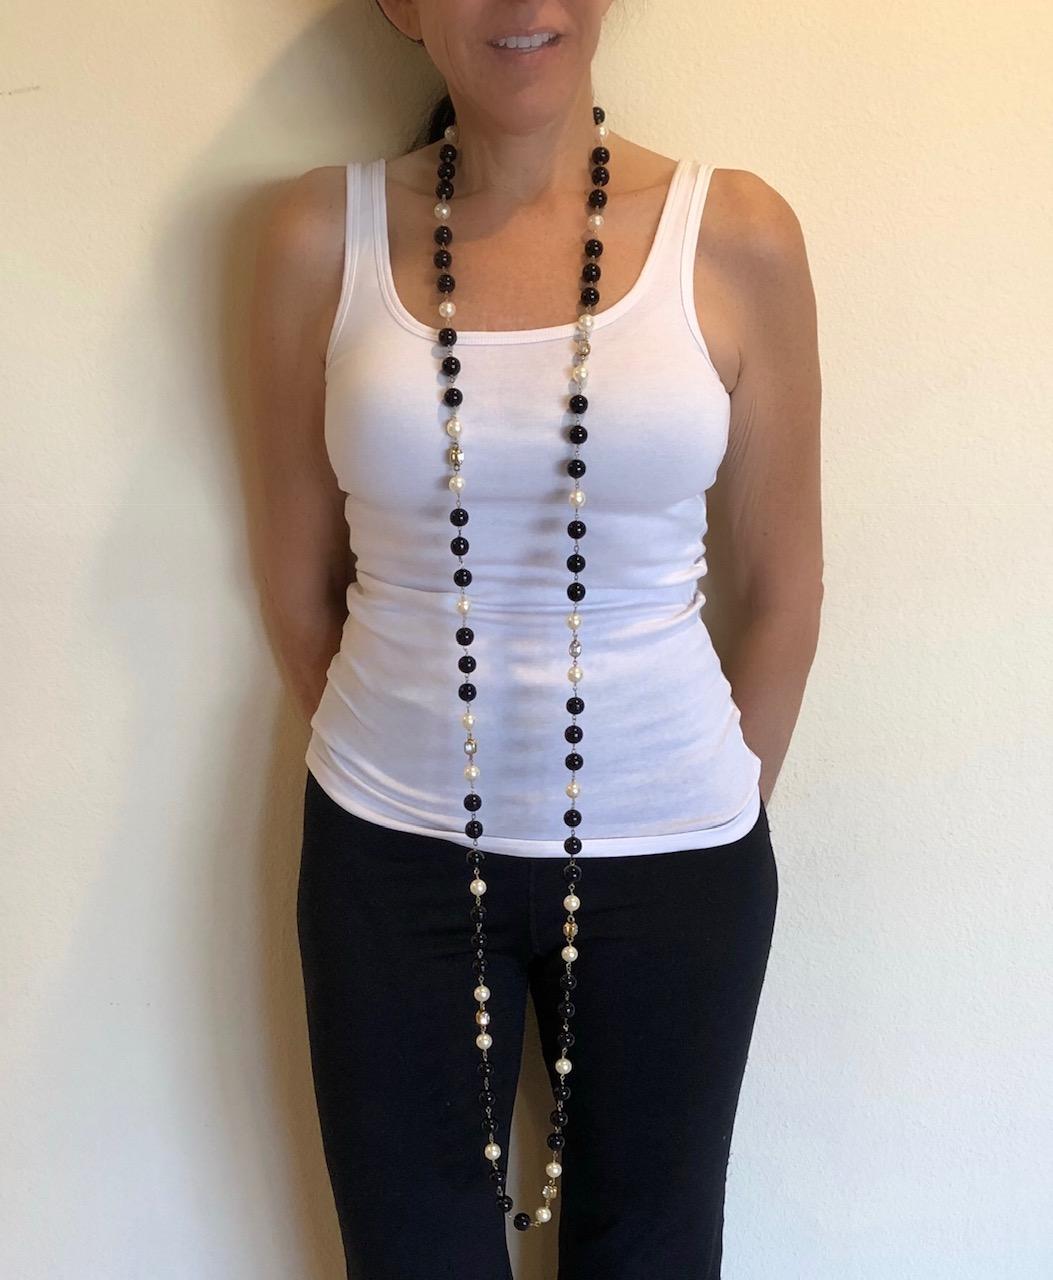 Scarce vintage Chanel sautoir necklace made in France, 1994 A collection (autumn) - the long statement necklace features large black beads and creamy white pearls. In all Coco Chanel manner, the necklace is accented by large diamante stones set in